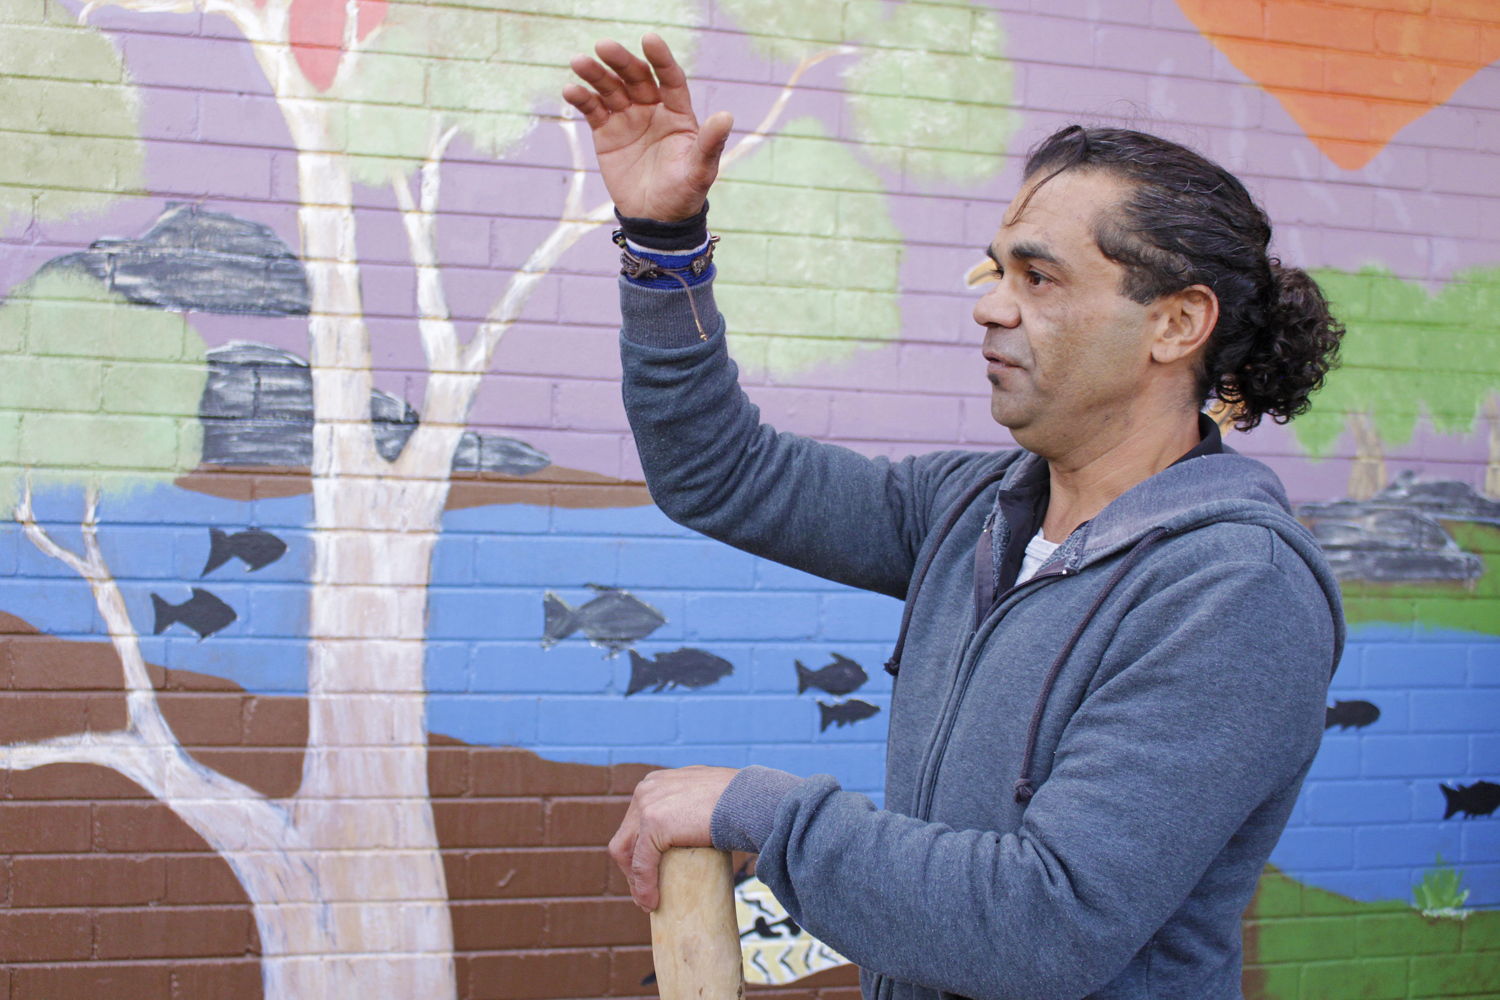 Artist Daniel Williams in front of one of the murals in Canberra. Image: Adam Spence, ANU.